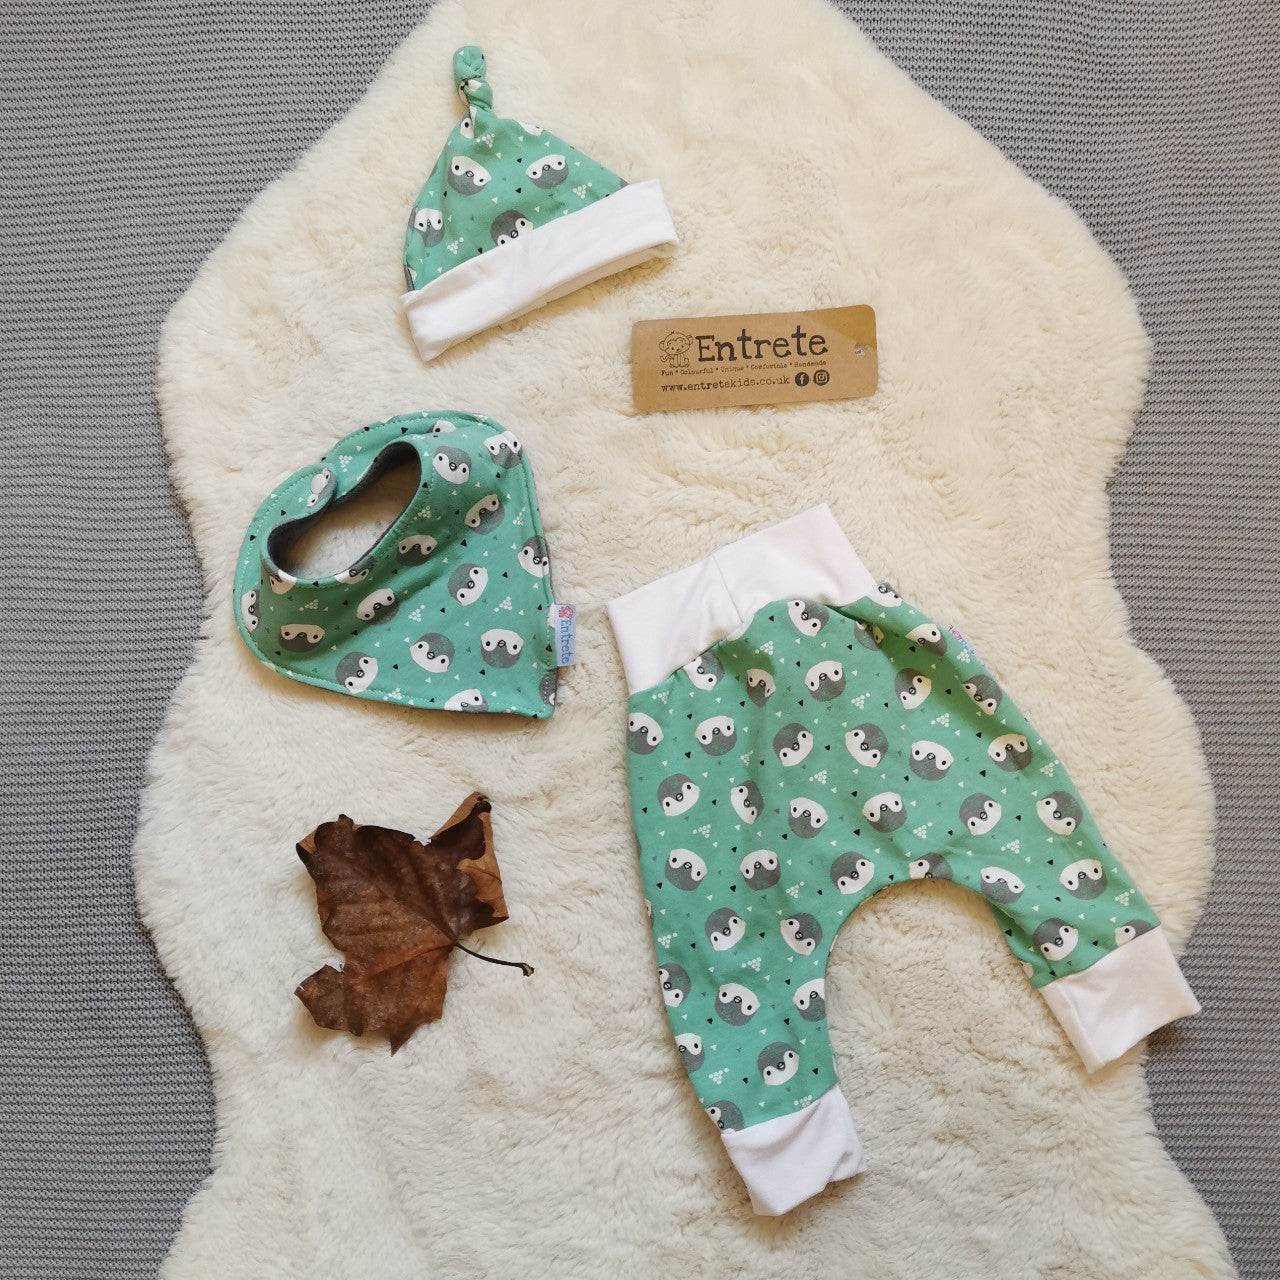 Harem gift set, shown in mint penguins for demonstration purposes only. Yours will be handmade using the gorgeously colourful speckled galaxy cotton jersey.